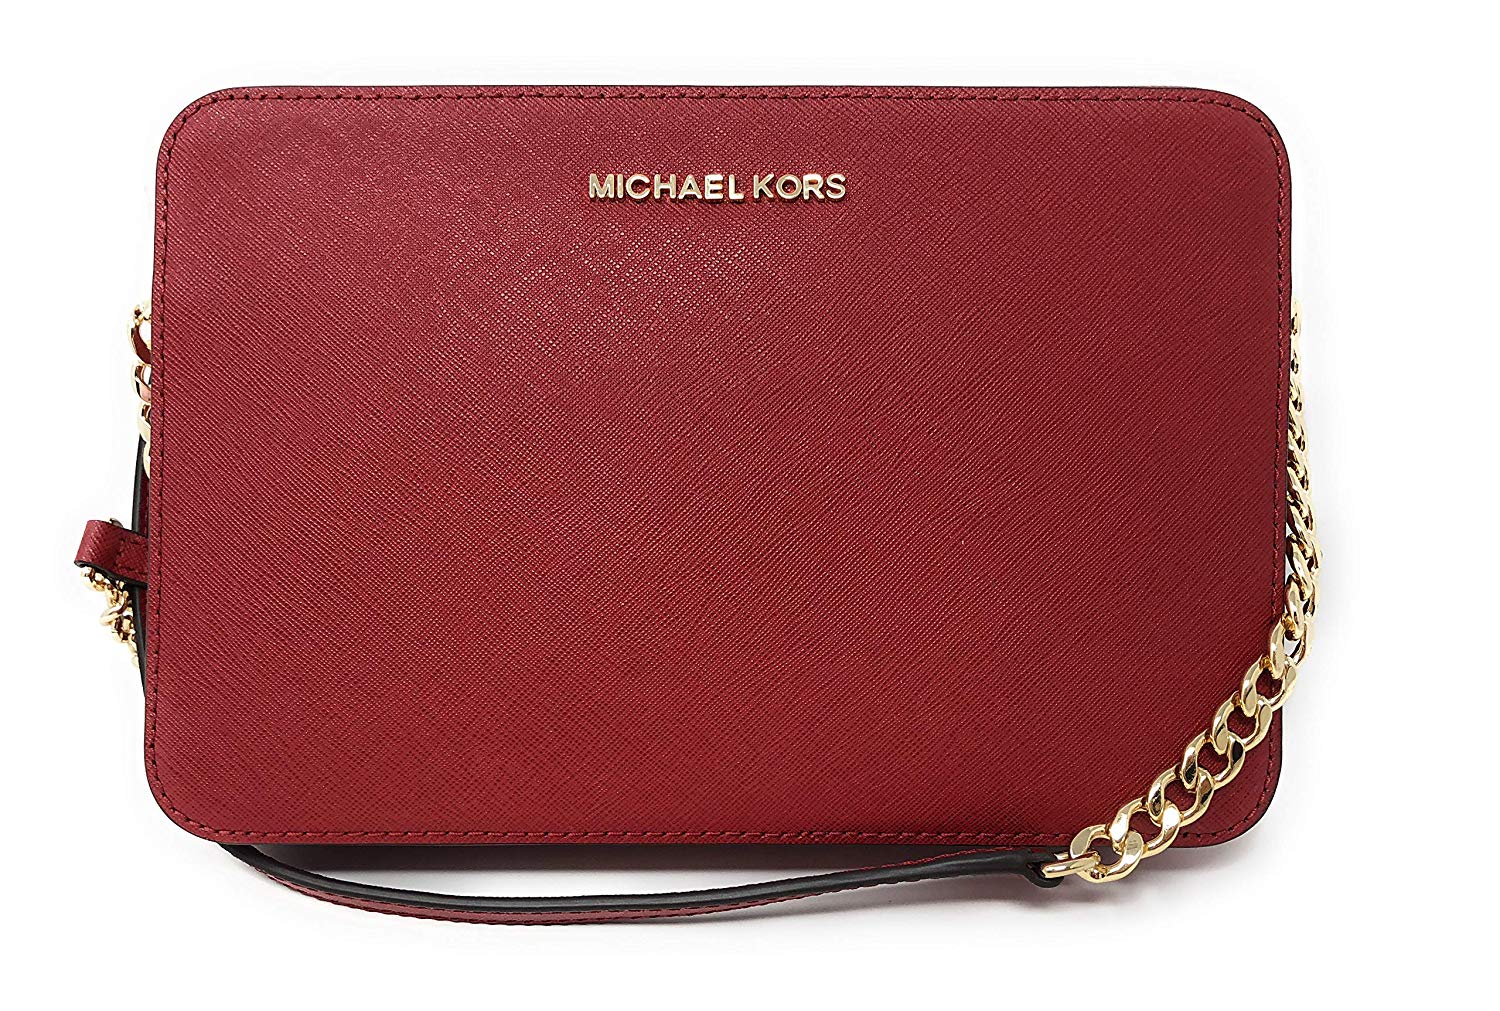 Michael Kors Scarlet Jet Set Travel Small Saffiano Leather Coin Purse, Best Price and Reviews